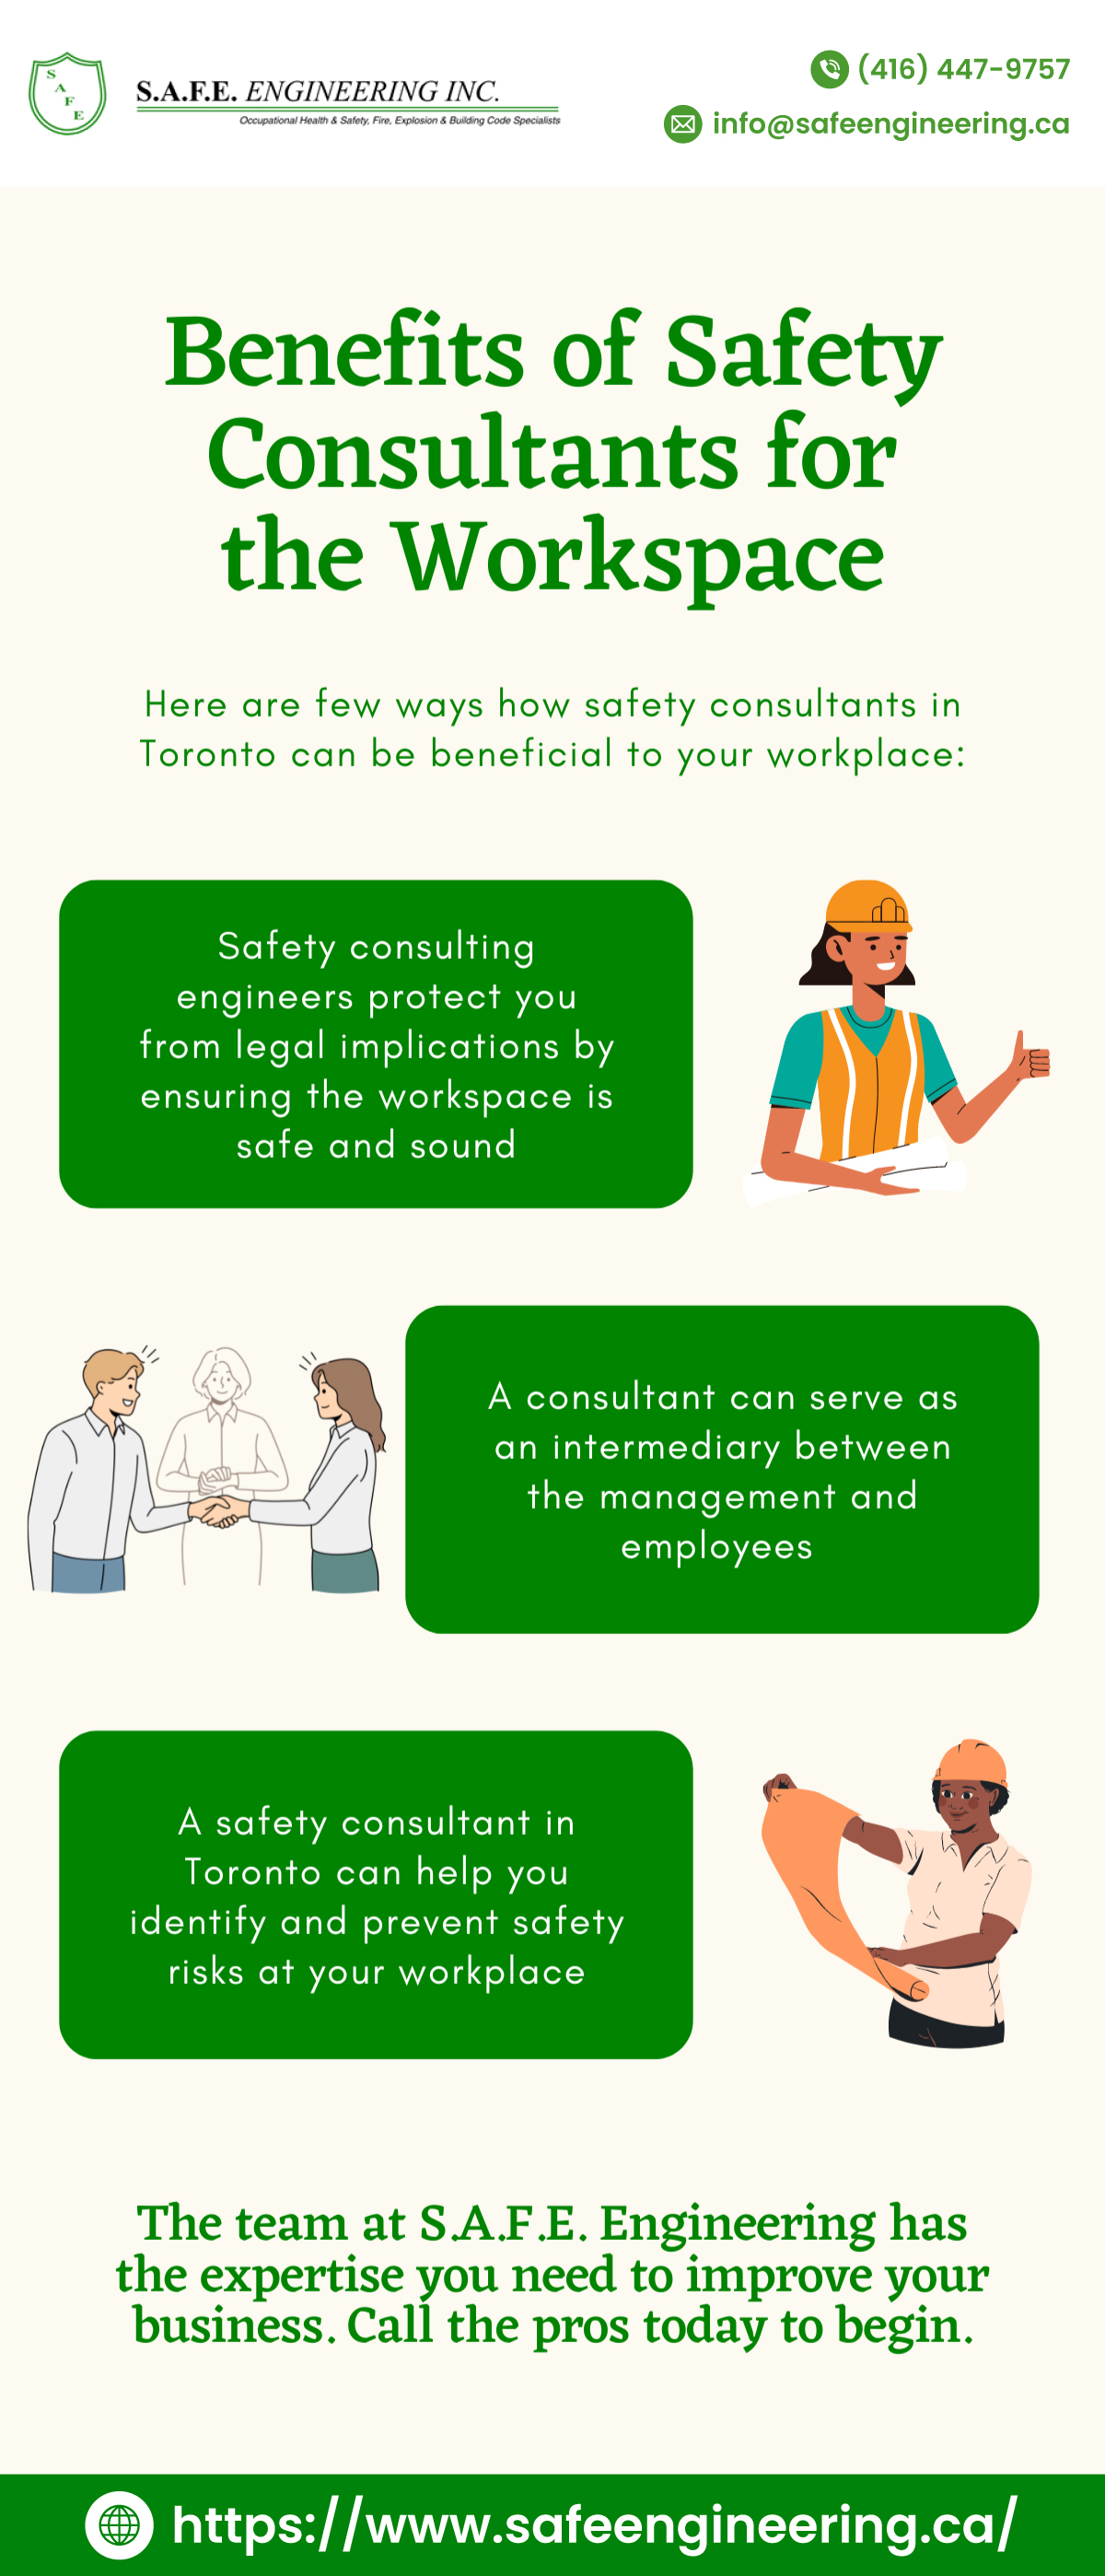 <= 416) 447-9757
, S.A.F.E. ENGINEERING INC. © (416)

Comin ct Bs Fn. Bi § iy Ch re ® info@safeengineering.ca

Benefits of Safety
Consultants for
the Workspace

Here are few ways how safety consultants in
Toronto can be beneficial to your workplace:

Safety consulting
engineers protect you
from legal implications by
ensuring the workspace is
safe and sound

A consultant can serve as
an intermediary between
the management and
SIE

A safety consultant in
Toronto can help you
identify and prevent safety
risks at your workplace

 

The team at S.A F.E. Engineering has
the expertise you need to improve your
business. Call the pros today to begin.

https://www.safeengineering.ca/